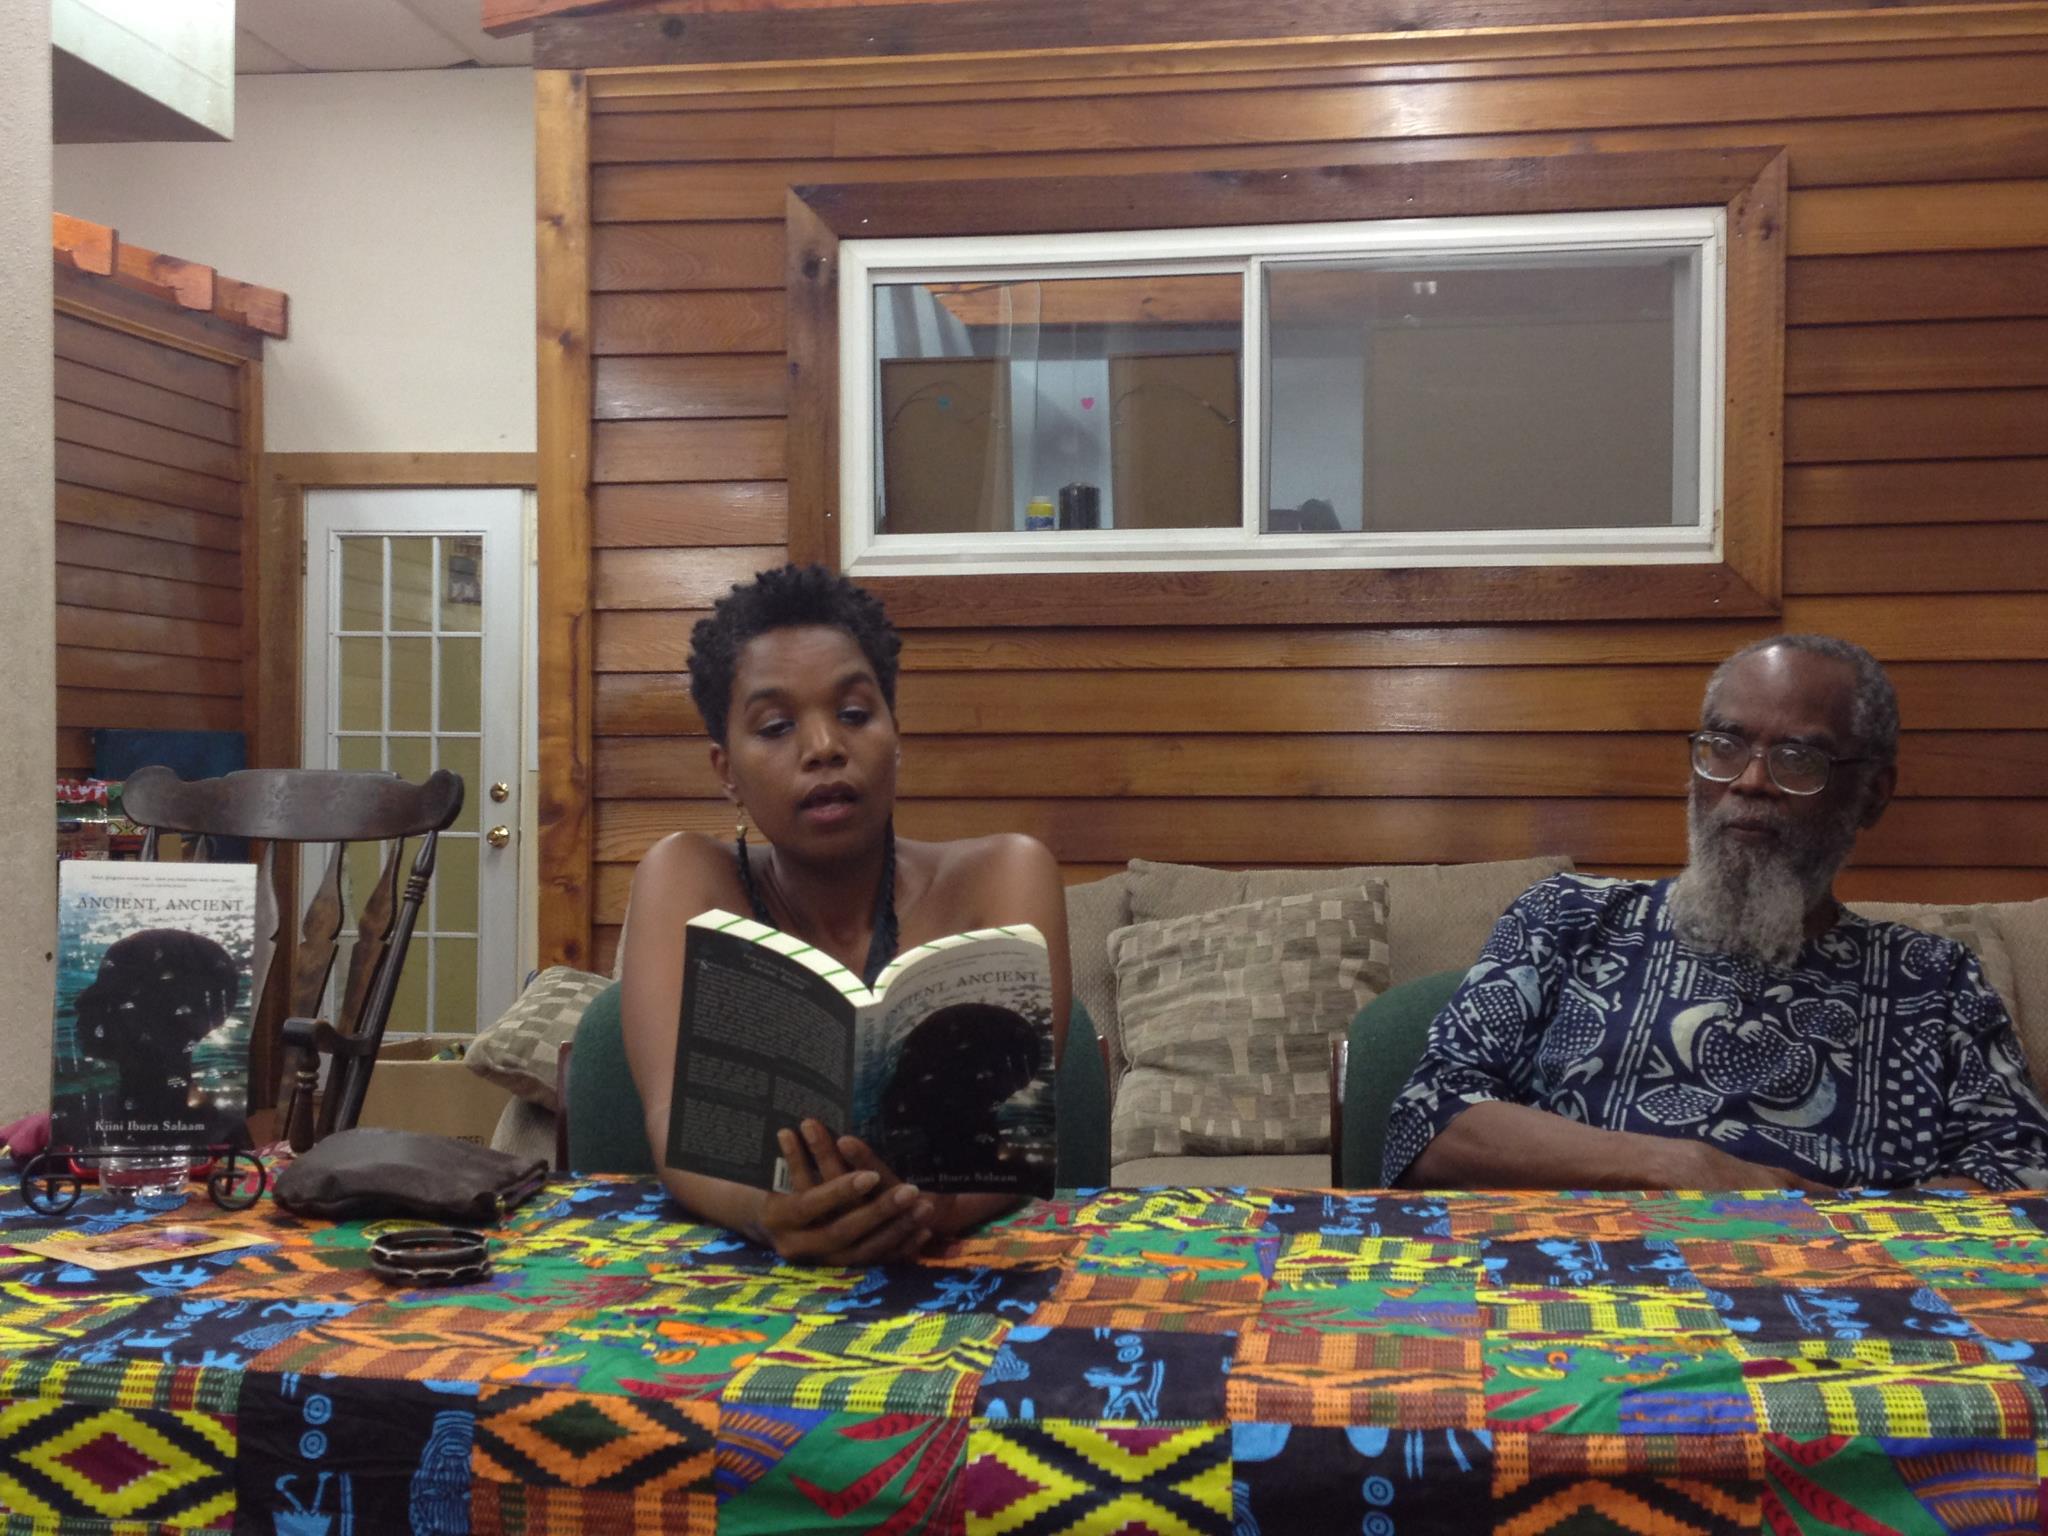 Reading at an event with my father at Community Book Center.